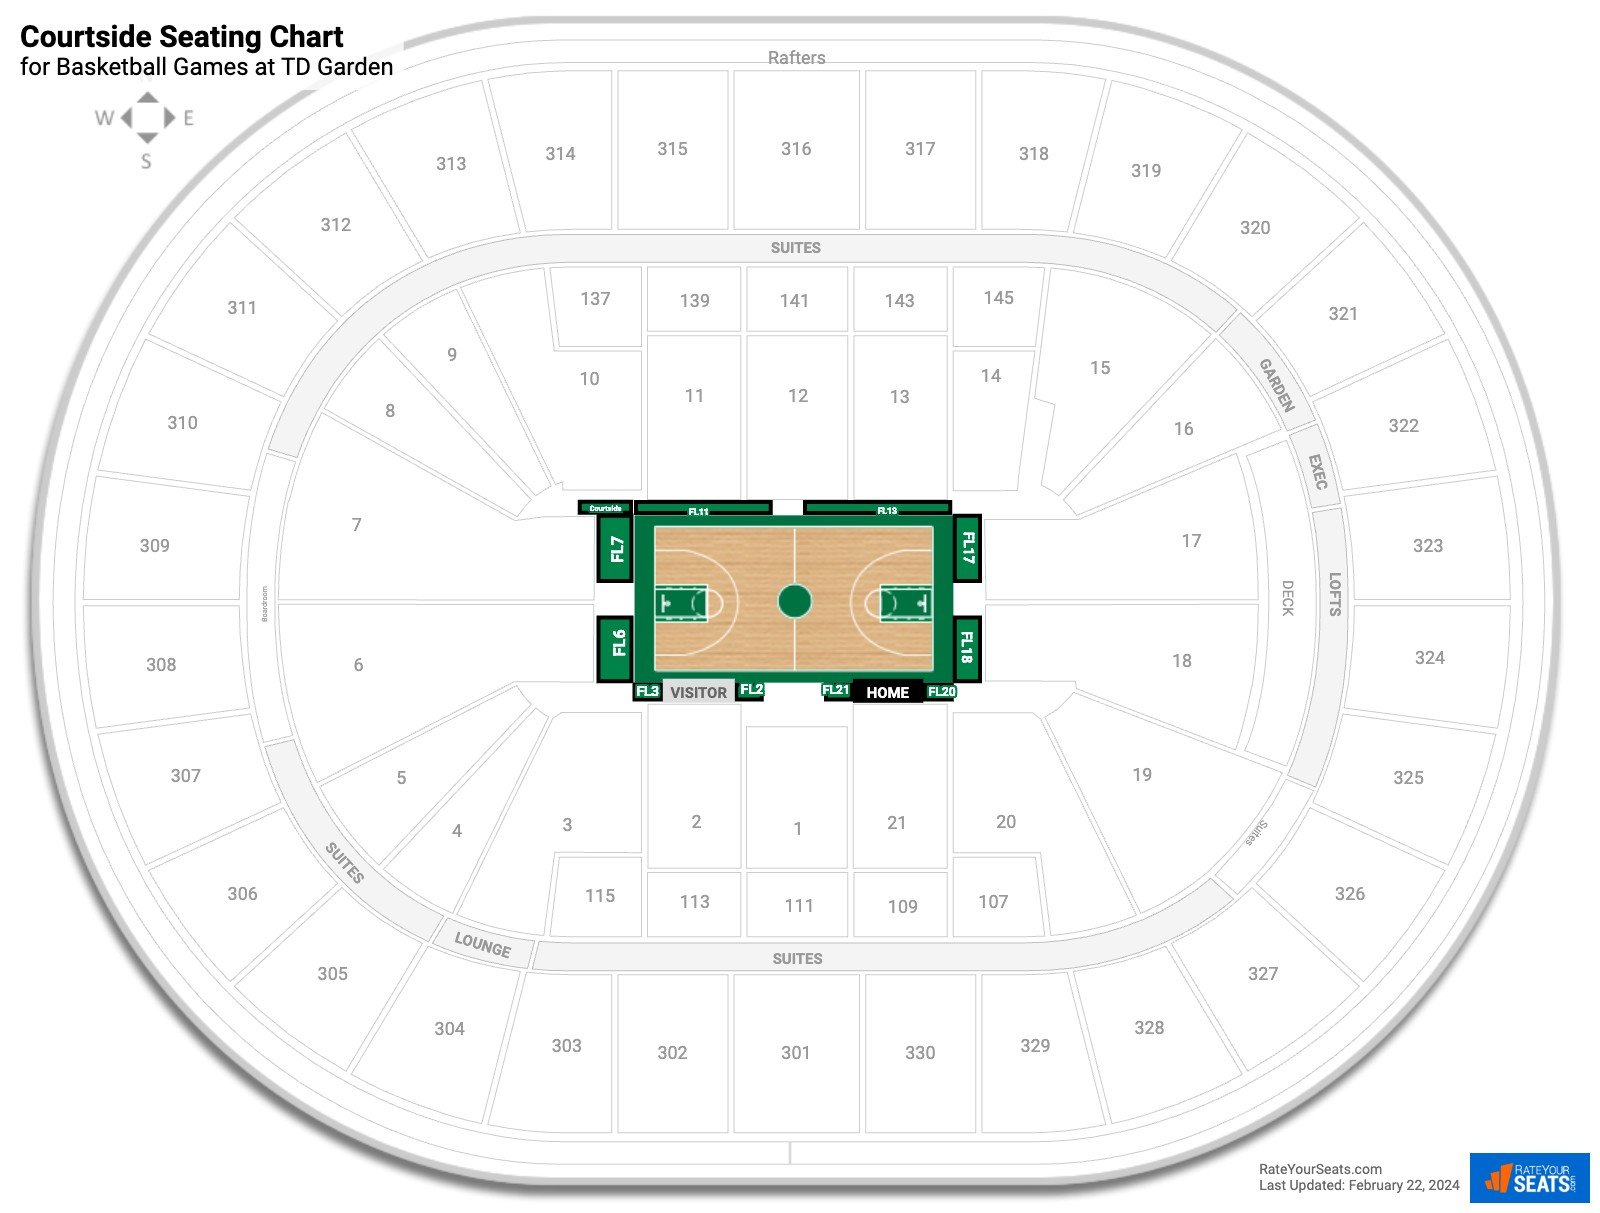 Basketball Courtside Seating Chart at TD Garden